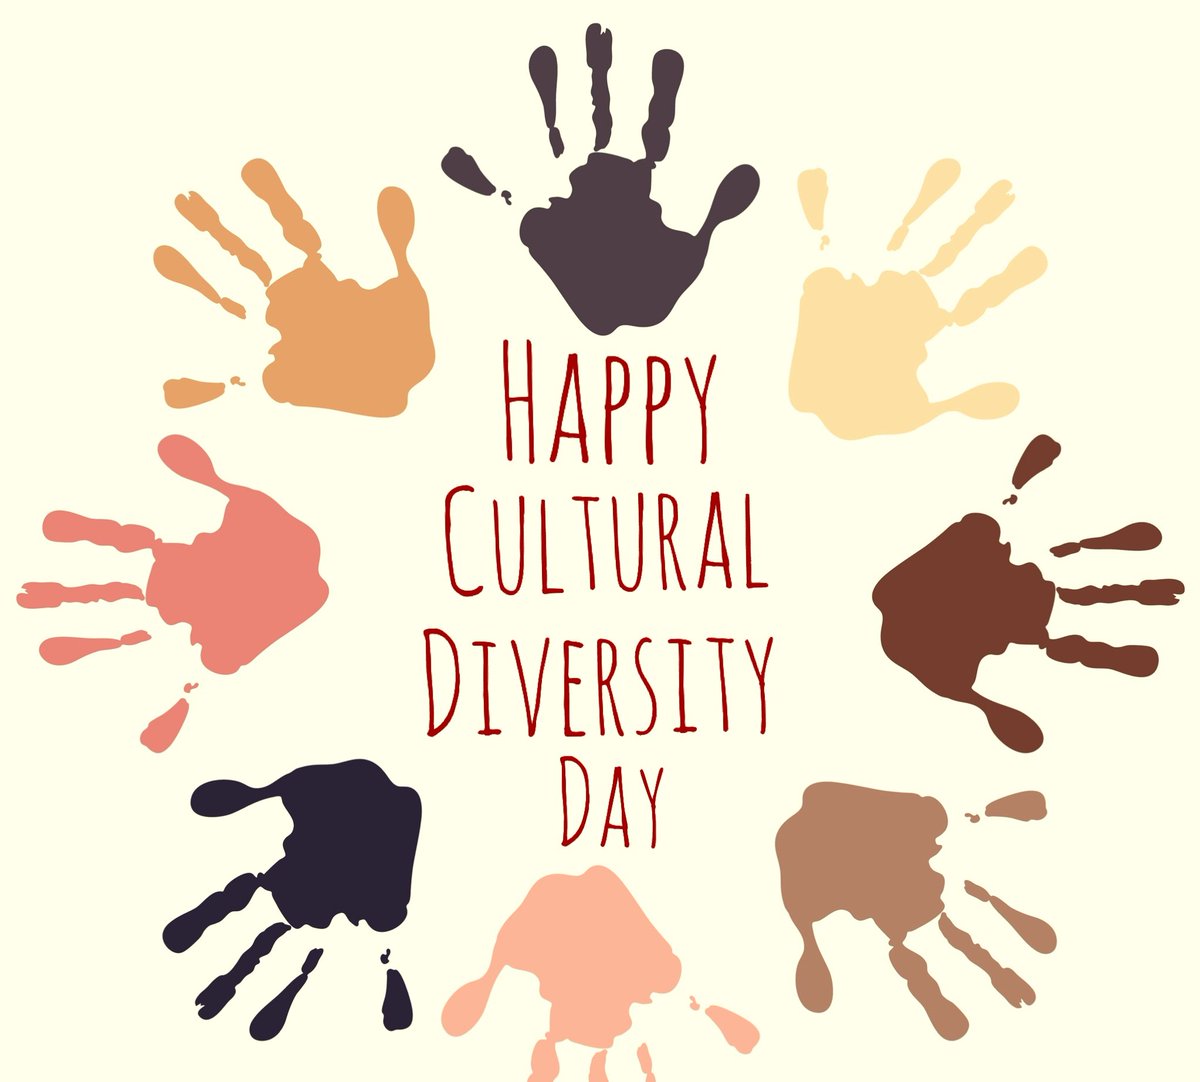 The beauty of the world lies in the diversity of its people!

#CulturalDiversityDay
#CelebratingDiversity
#WorldCulturalDay4Diversity